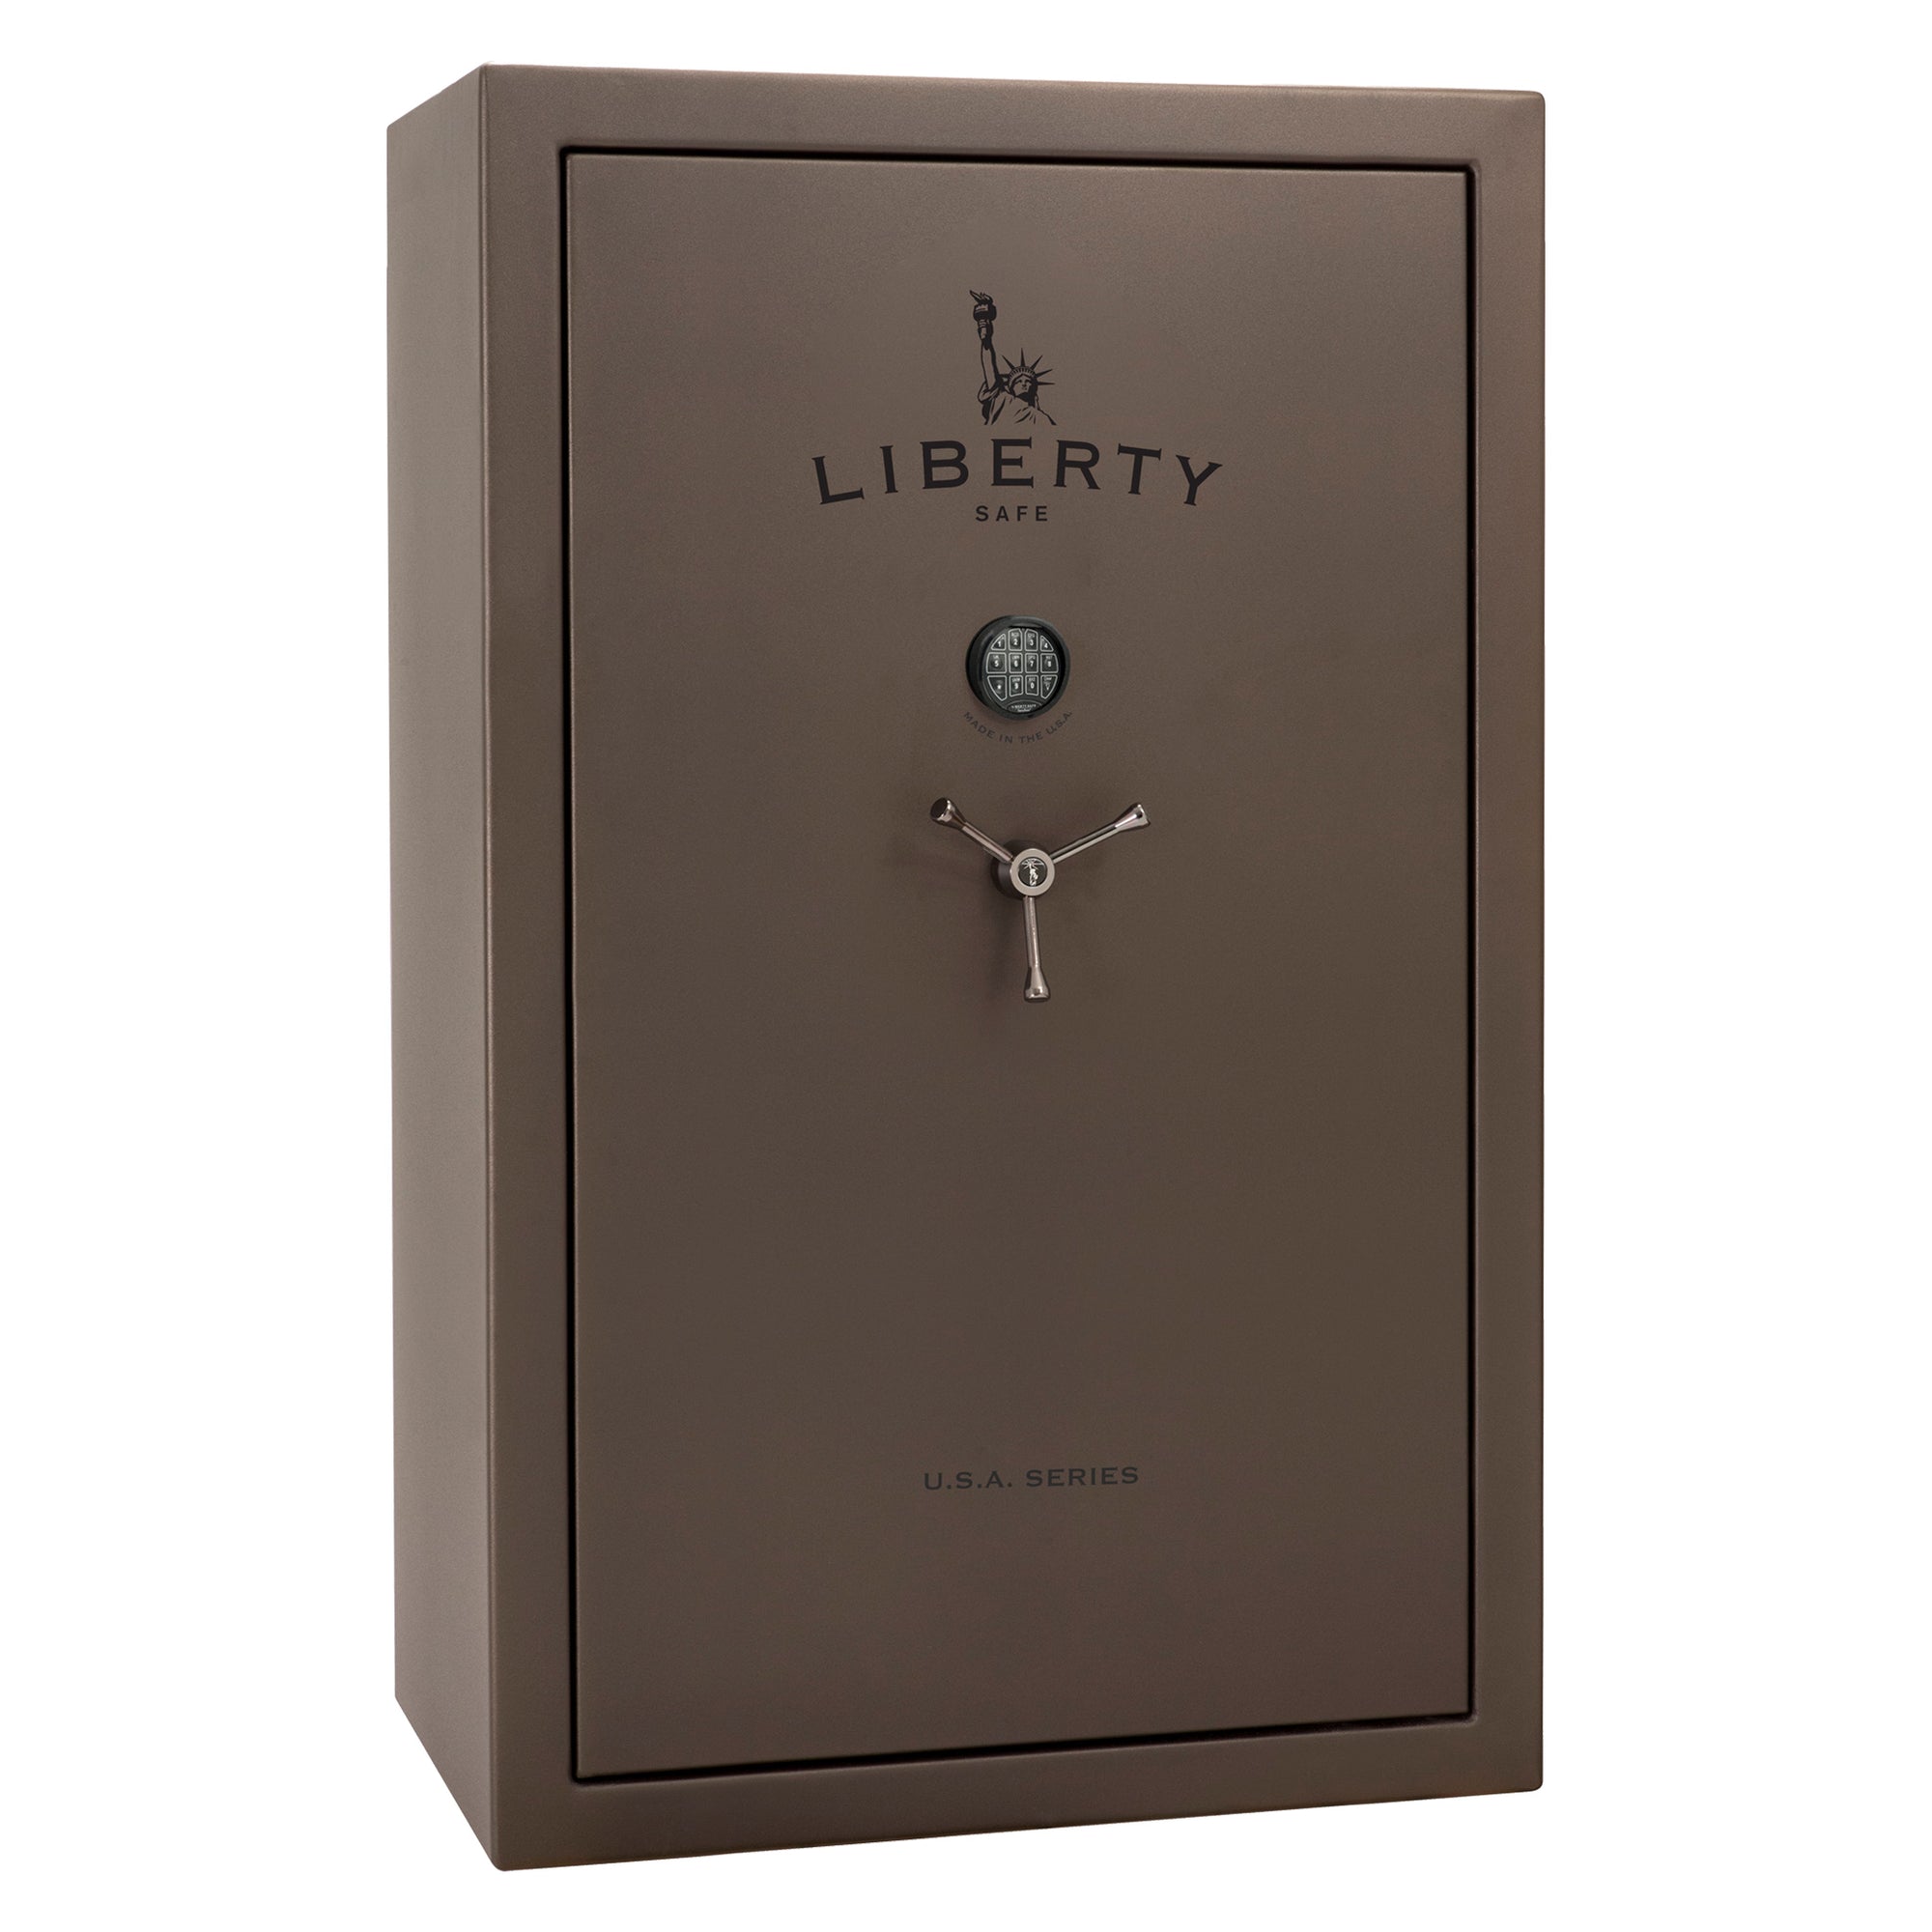 USA 48 Textured Bronze Elock 60.5"(H) x 42"(W) x 22"(D) | 60 Minute Fire Protection | Level 3 Security - Closed Door 